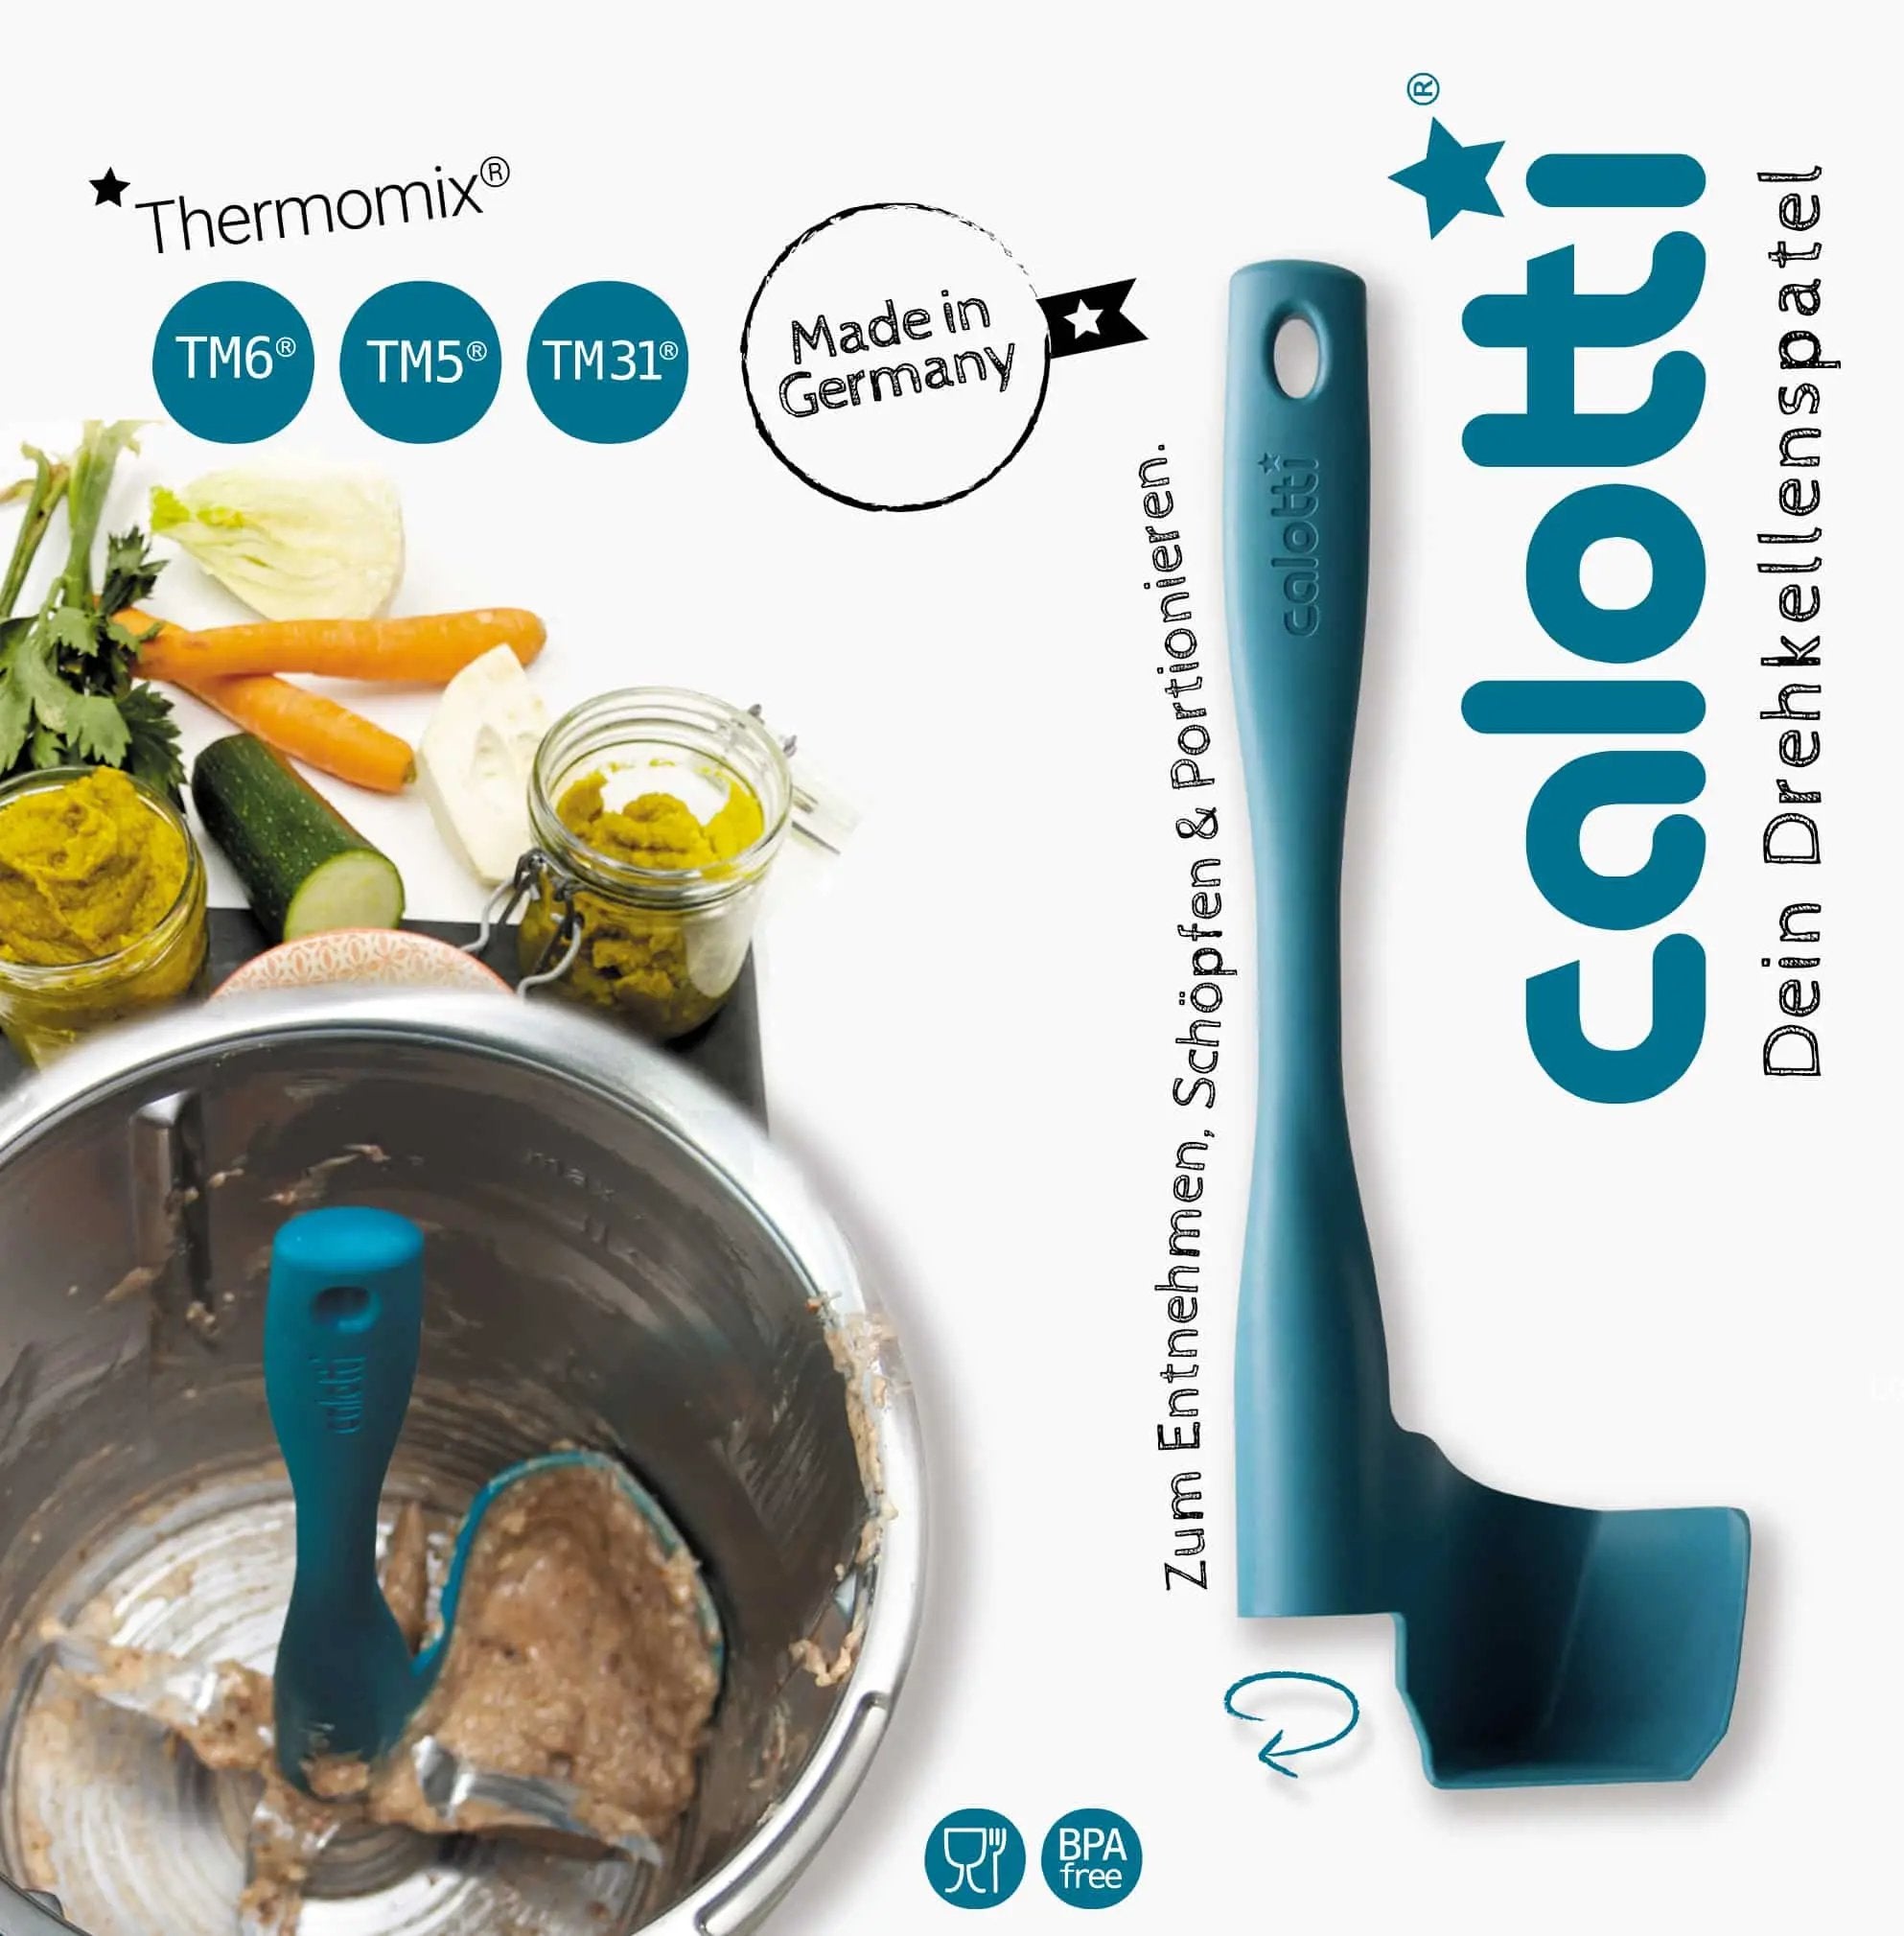 Termomix Bimby Thermomix Tm6 Accessoire Espatula Spatule Thermomix Tm31  Accesorios Monsieur Cuisine Connect Lidl CF-130